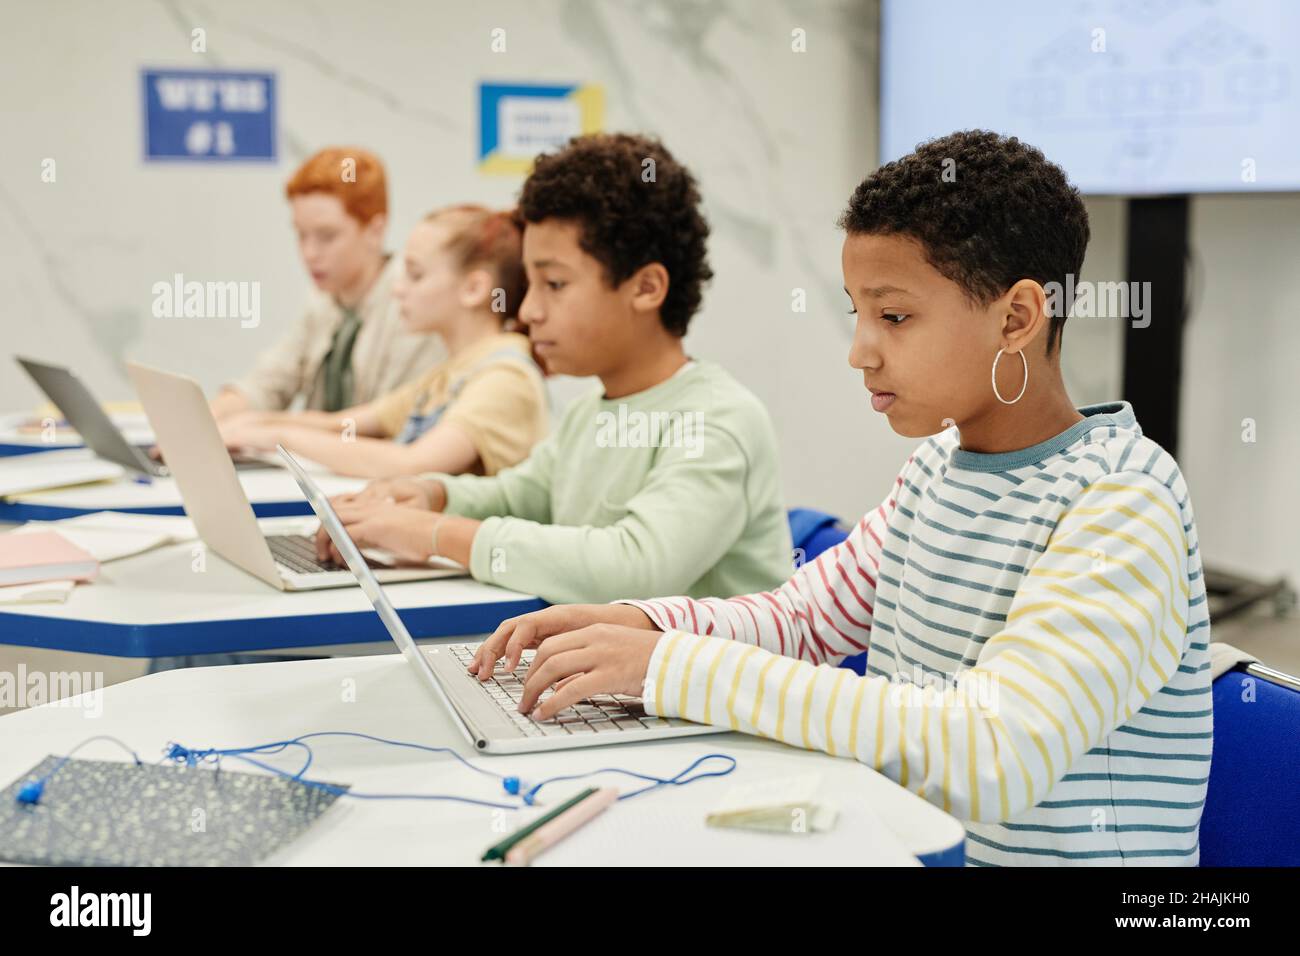 Side view at diverse group of children using laptops at desk in modern classroom, copy space Stock Photo